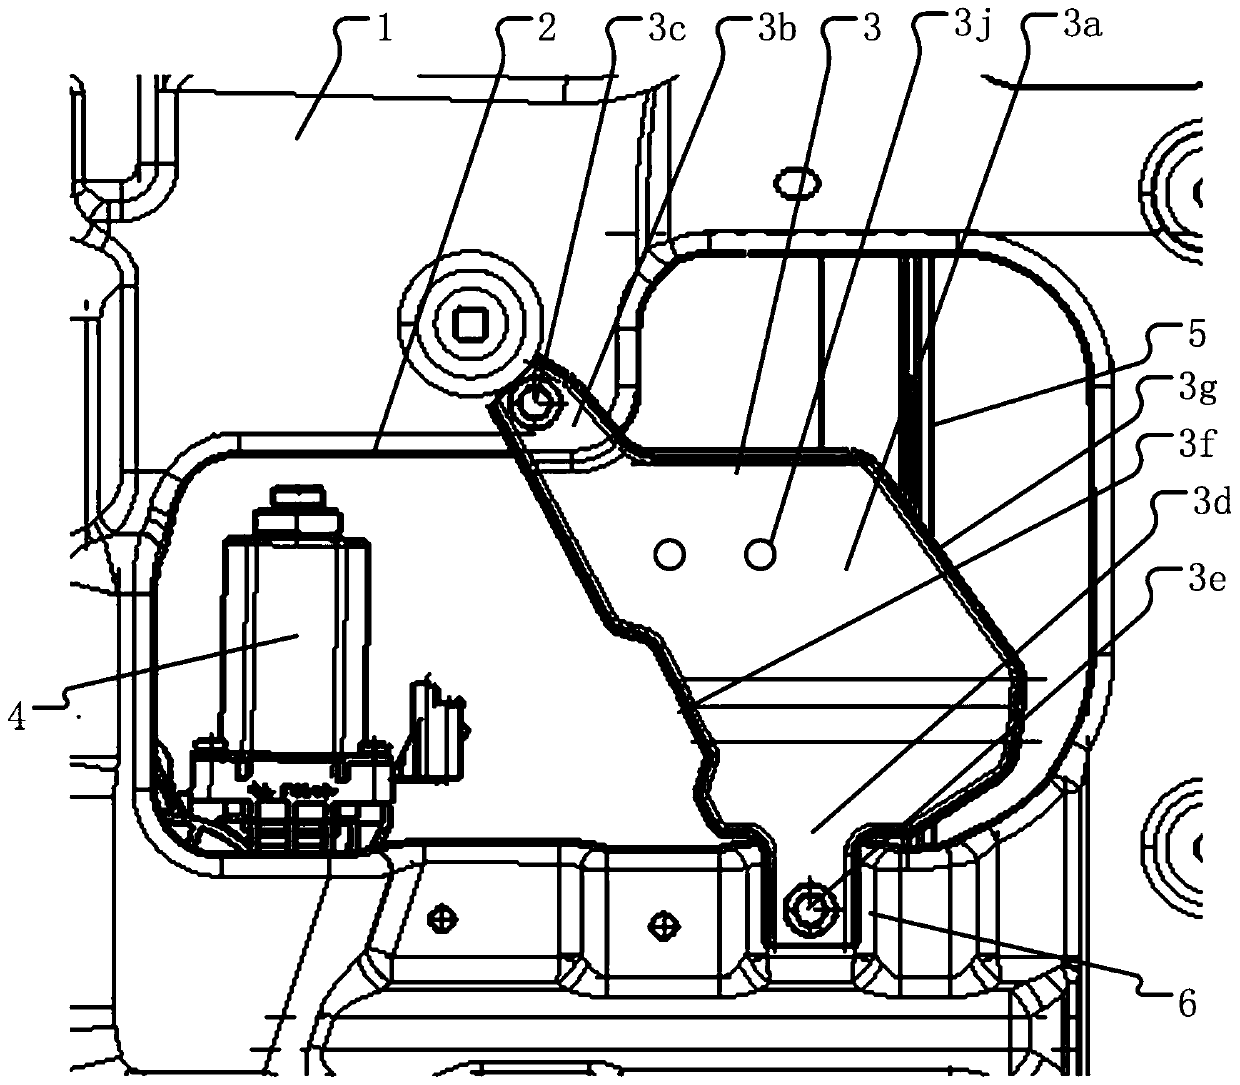 Vehicle door inner plate and vehicle with same